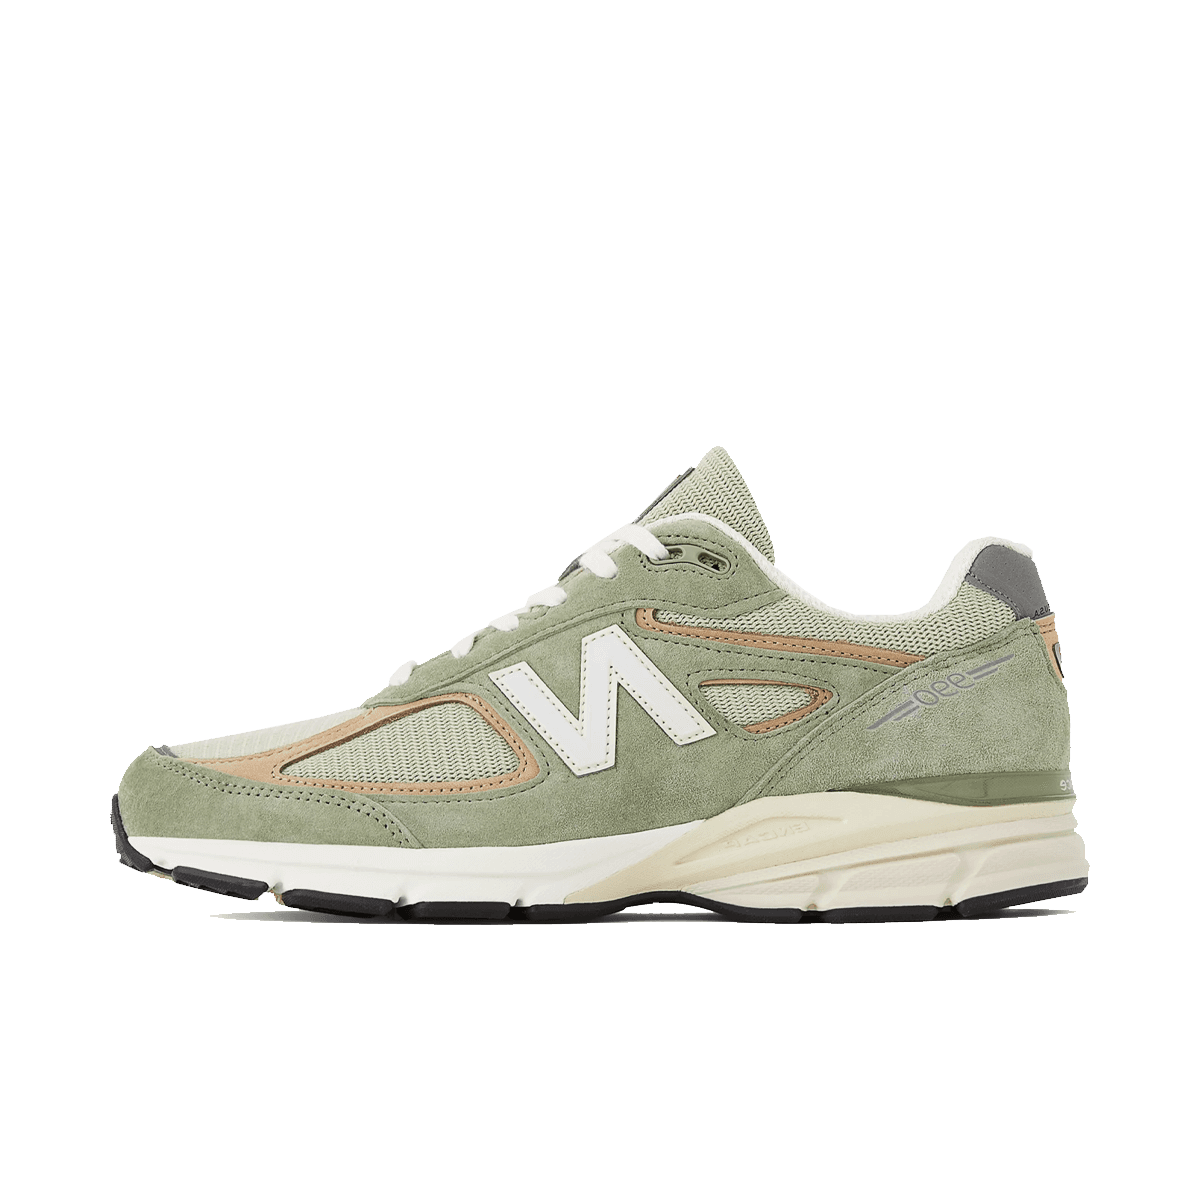 New Balance 990v4 'Olive' - Made in USA